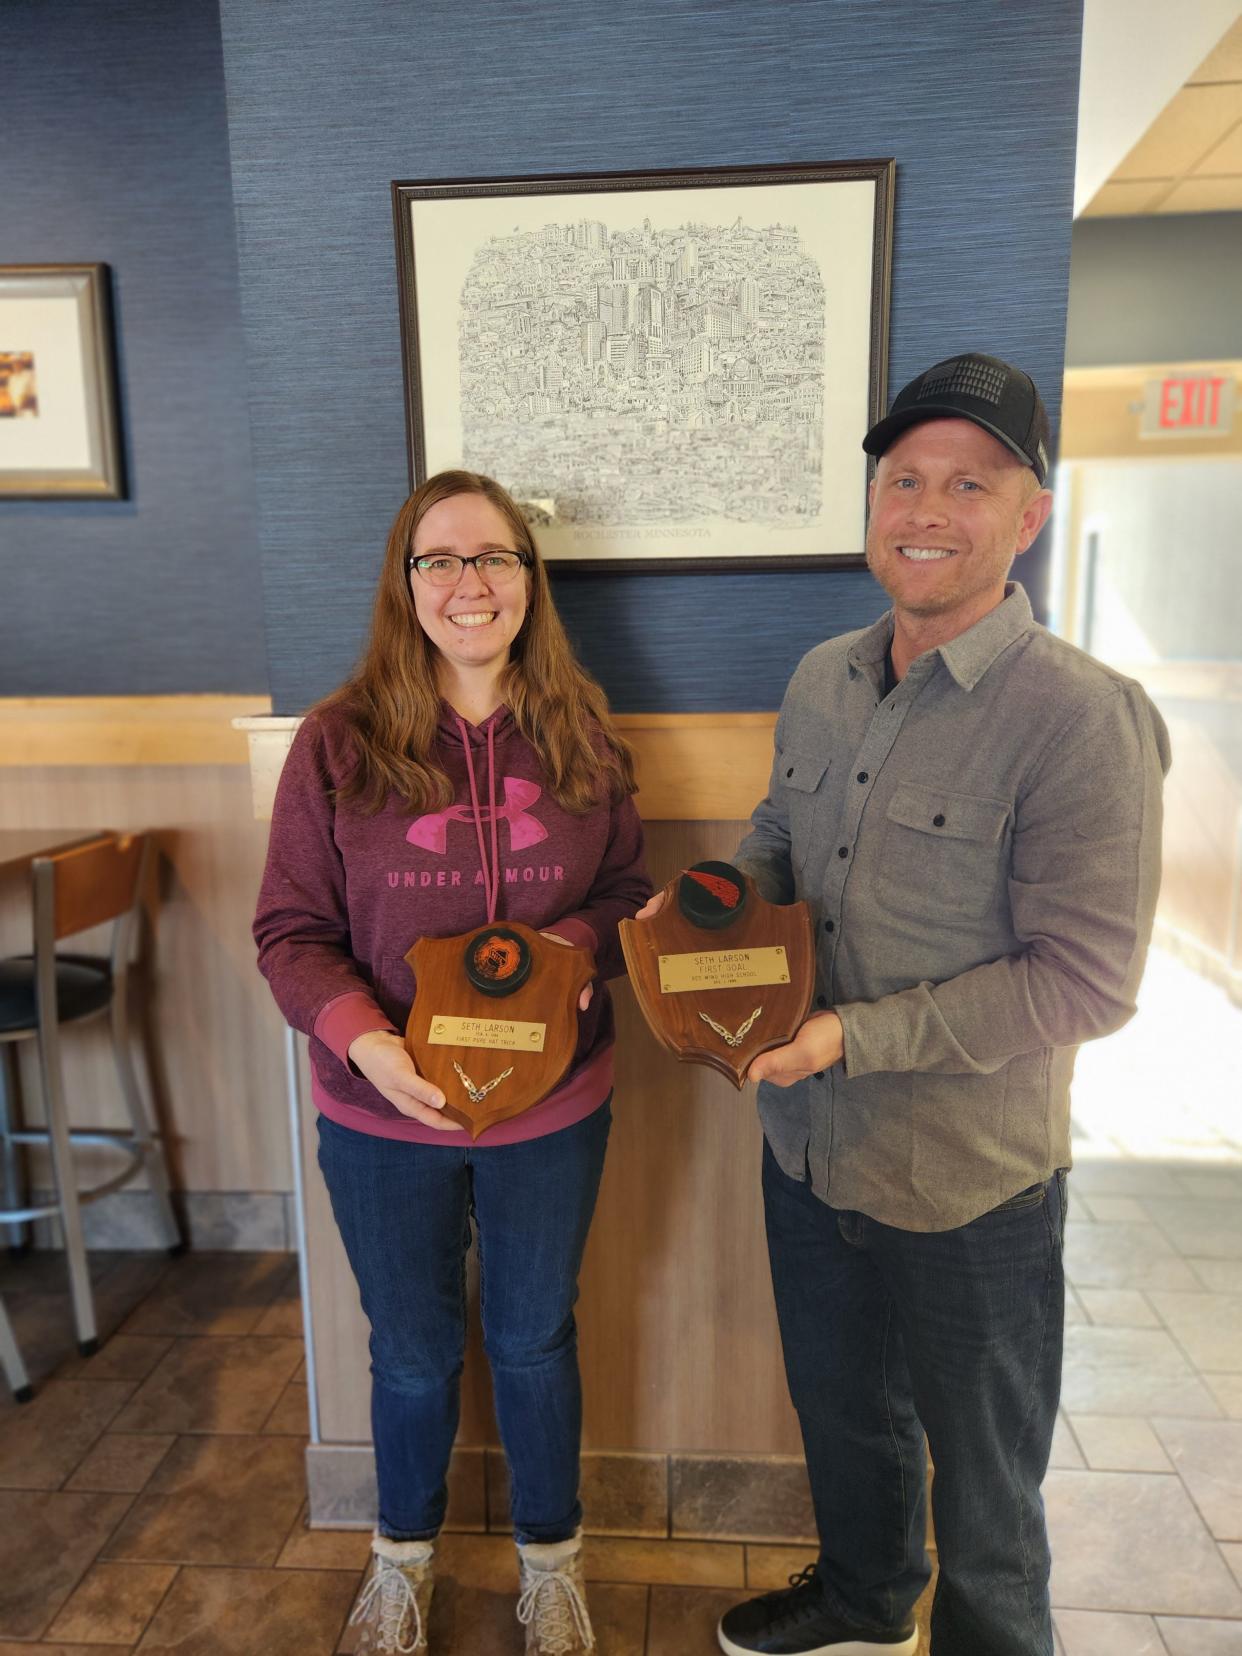 Sarah Cook and Seth Larson hold plaques made by her grandfather honoring Larson's first hockey goal and his first natural hat trick at Red Wing High School in Minnesota. Cook recently discovered the second in the attic of her mother's home in Hager City, Wisconsin, where it had been stored after her grandfather's death, and gave it to Larson over lunch Monday in Rochester, Minnesota.